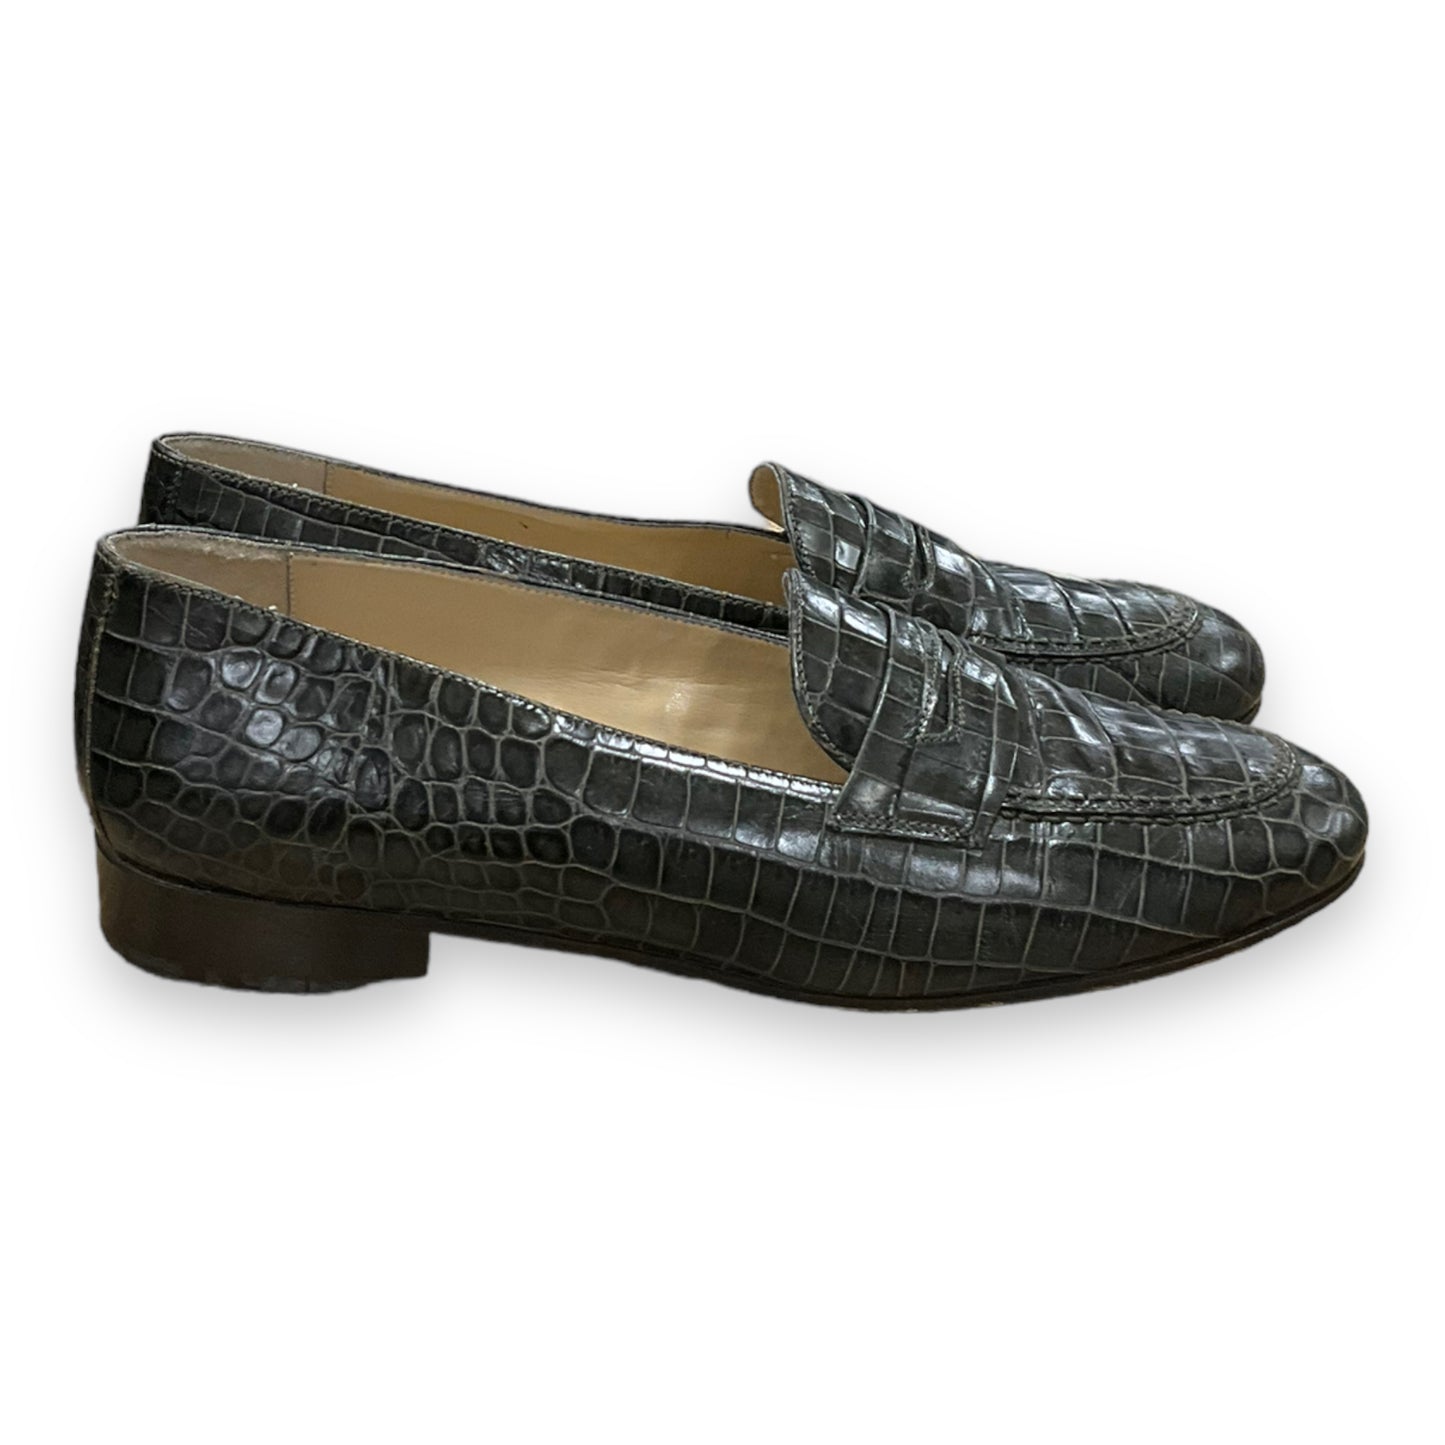 Shoes Flats Loafer Oxford By Talbots  Size: 7.5